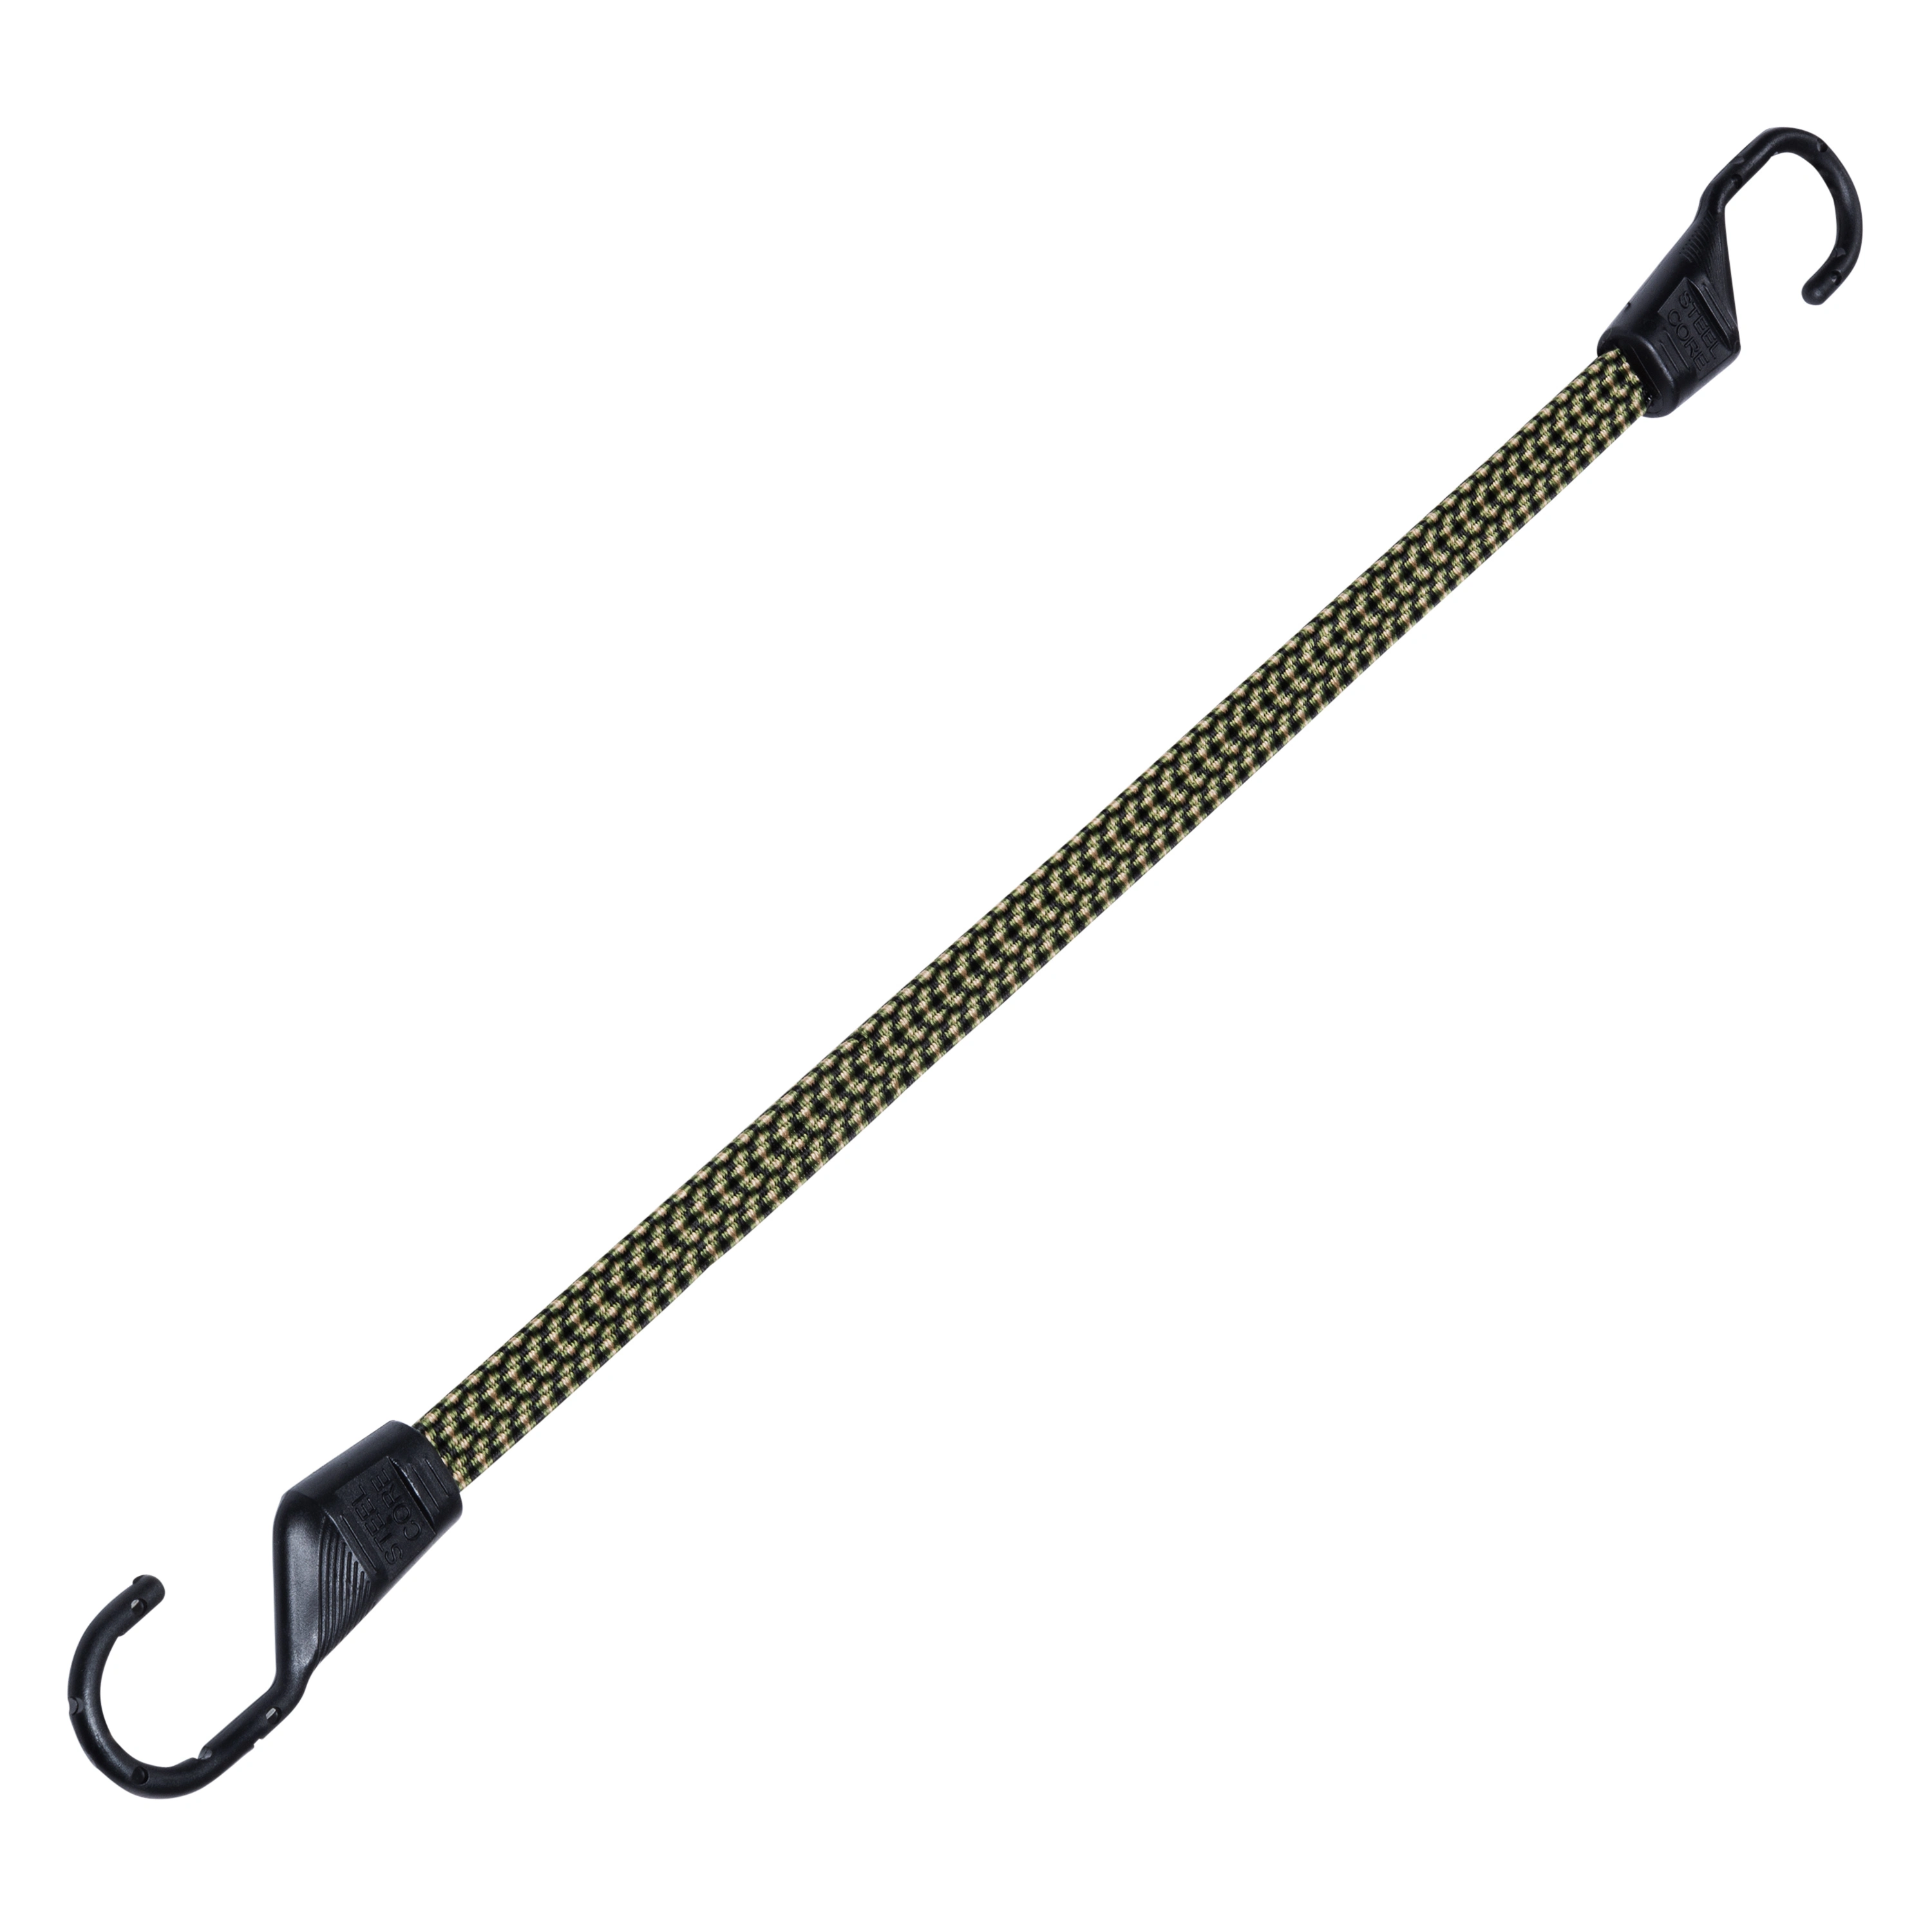 24" Flat Bungee Cord variant image view